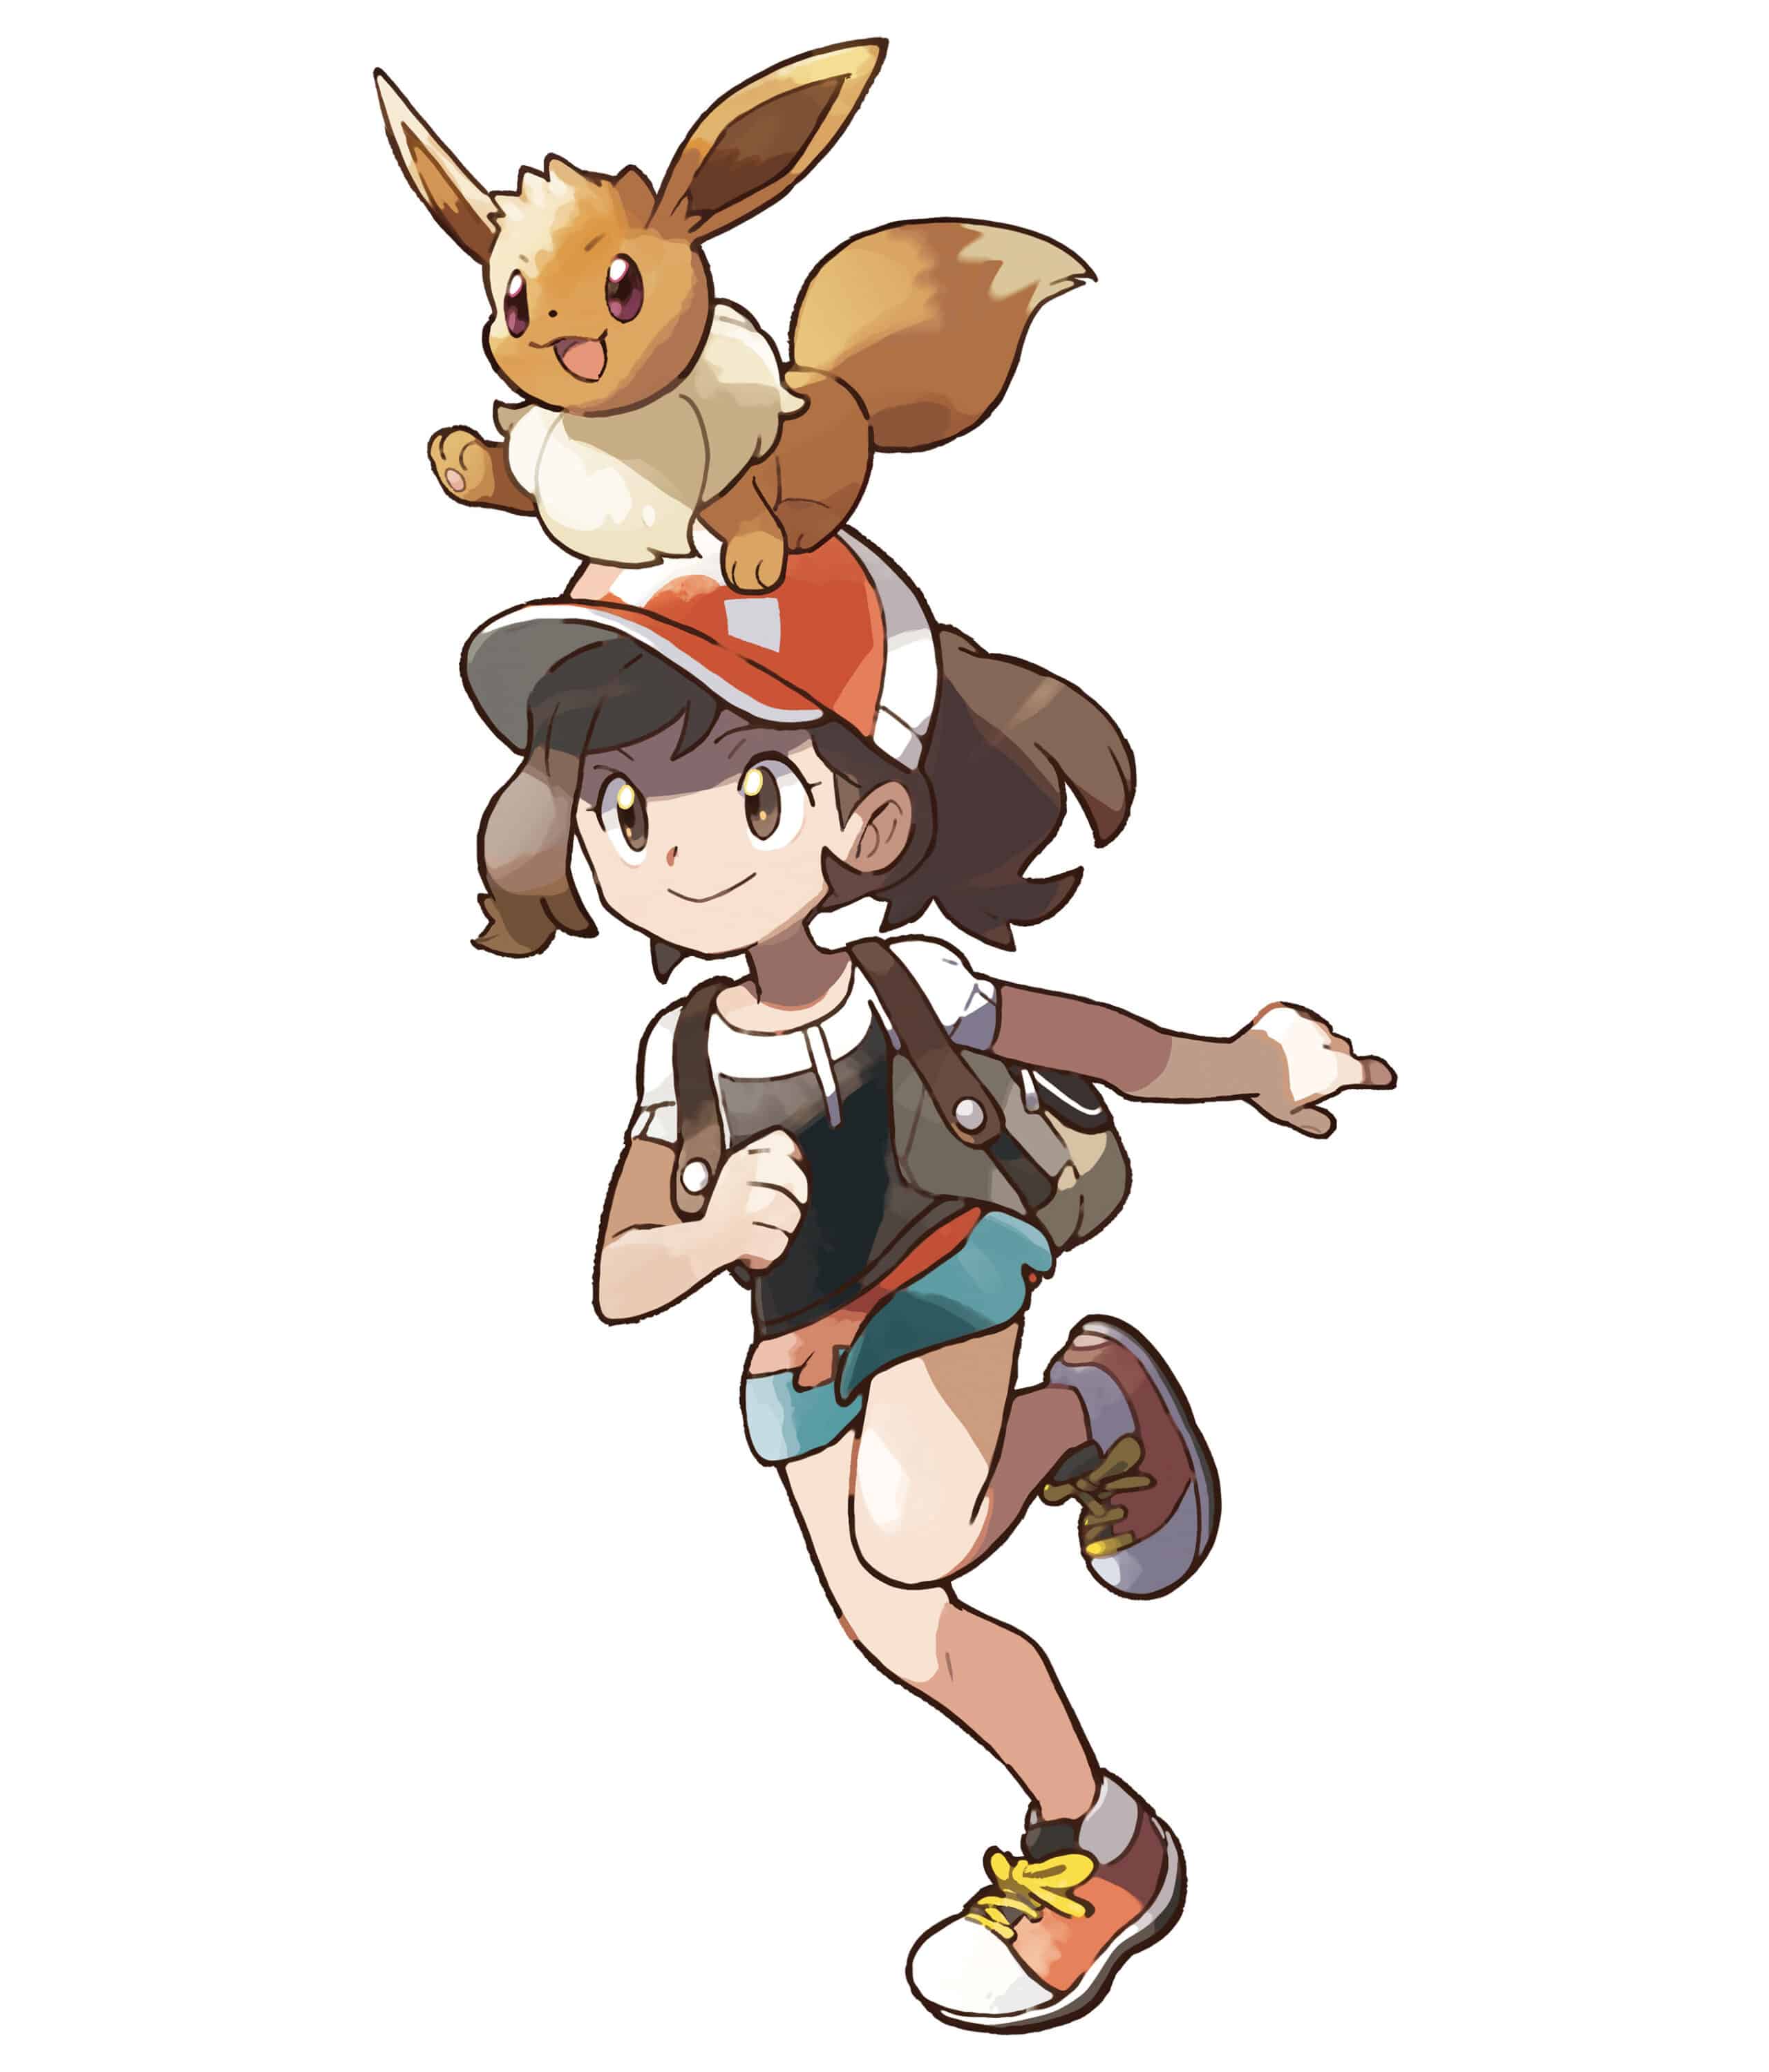 Pokemon Lets Go Pikachu and Lets Go Eevee Character Art 22625 x 3075